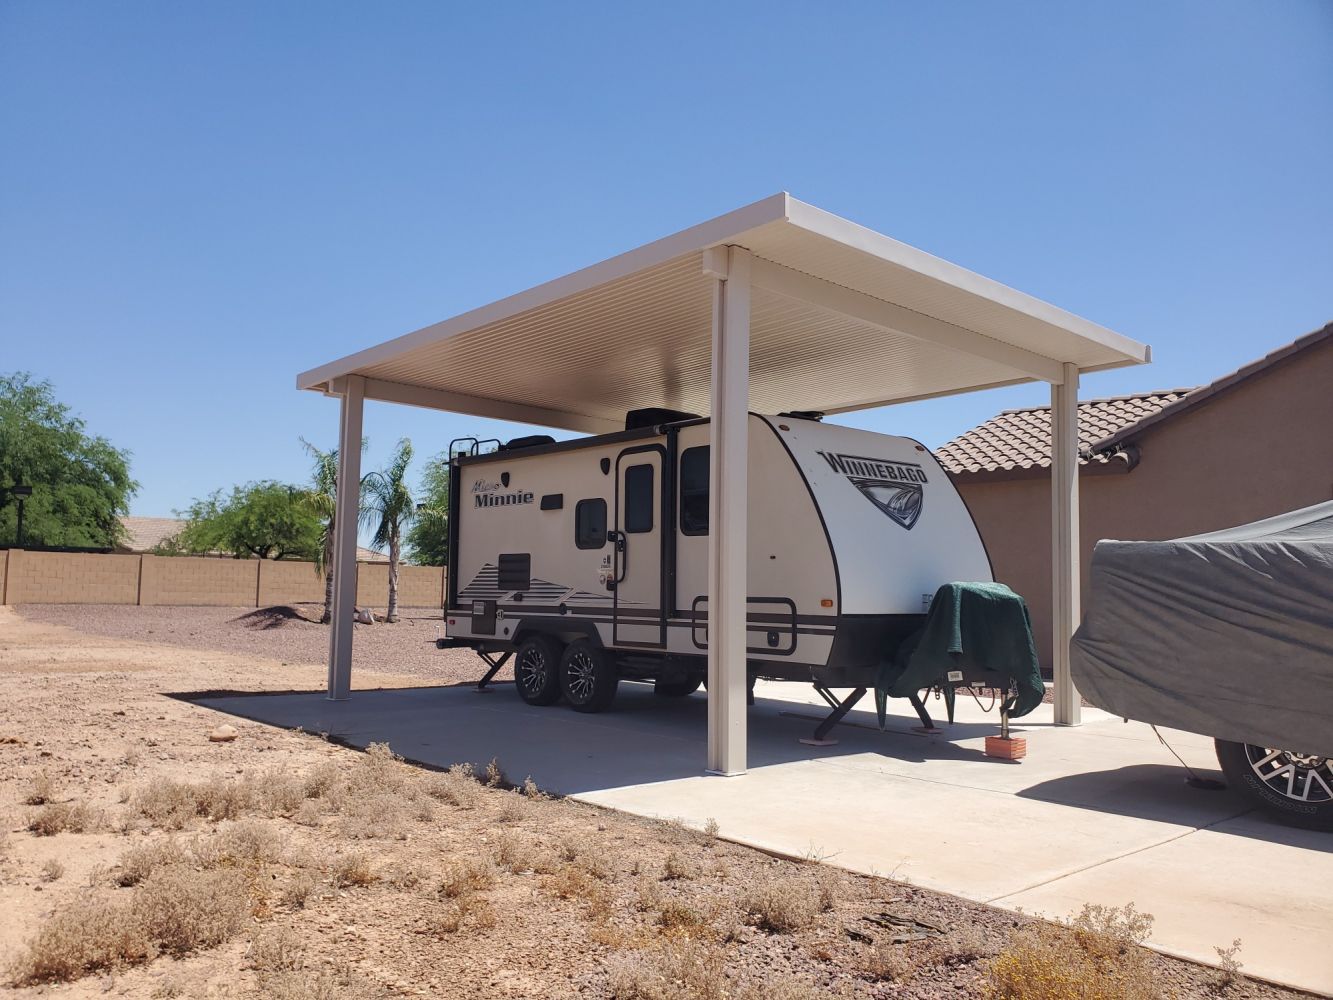 Families enjoying a shaded patio in Glendale, AZ, thanks to a durable Southwest Patio cover.